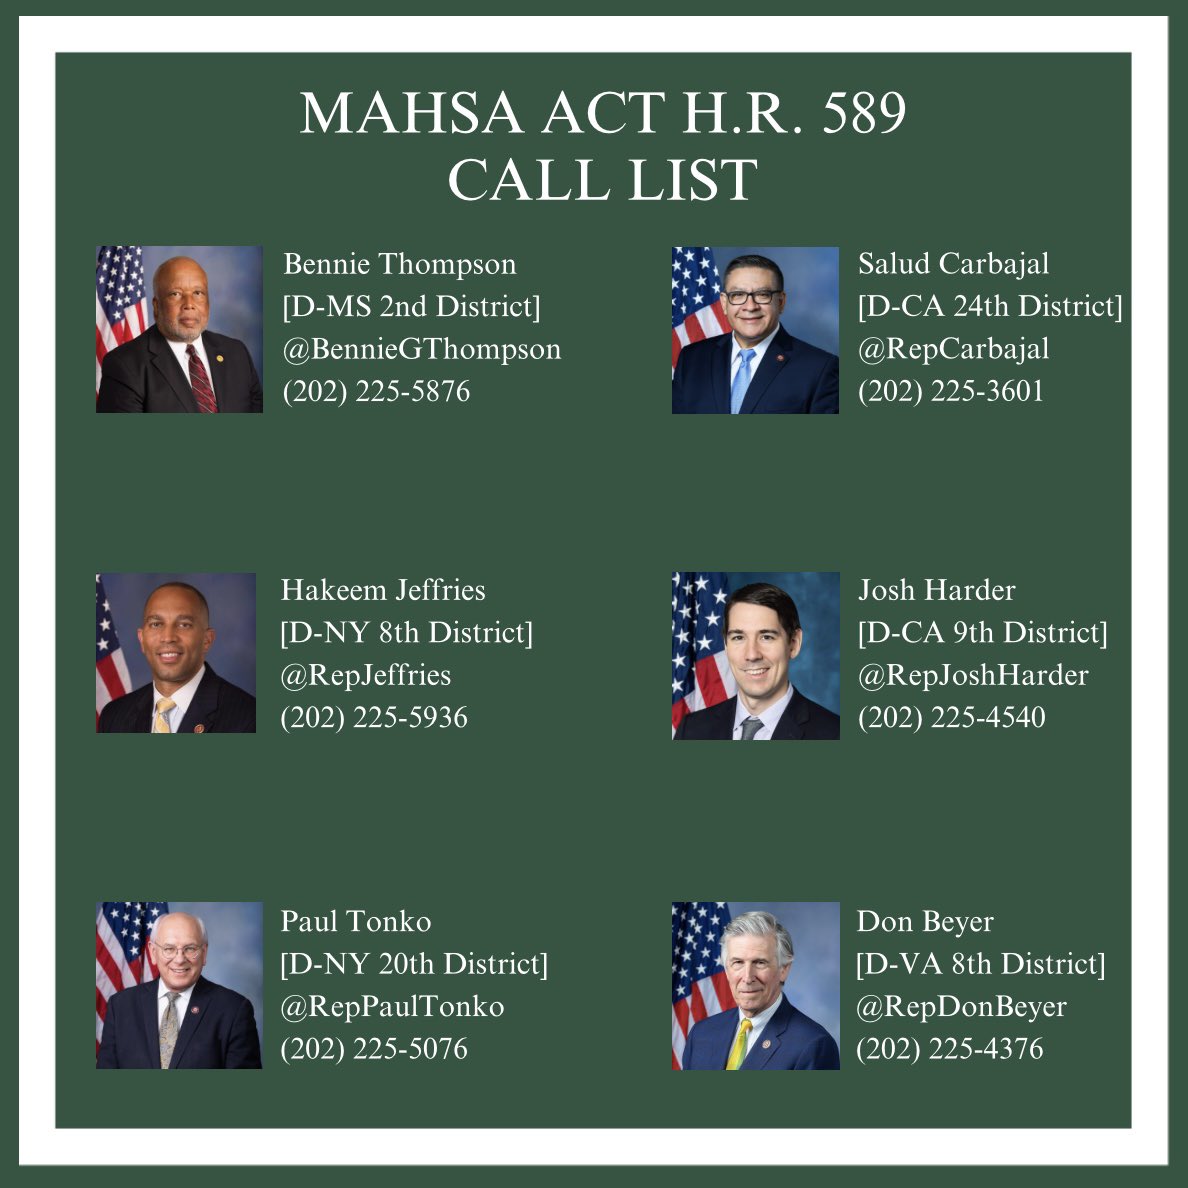 Please help make these calls. Please stand with Iran for freedom.
It takes less than 10 minutes. Ask these reps to co-sponsor the HR589 #MAHSAAct bill. All it takes is one person to change history. Let's have millions join the #MAHSAARMY and free Iran from 44 years of oppression